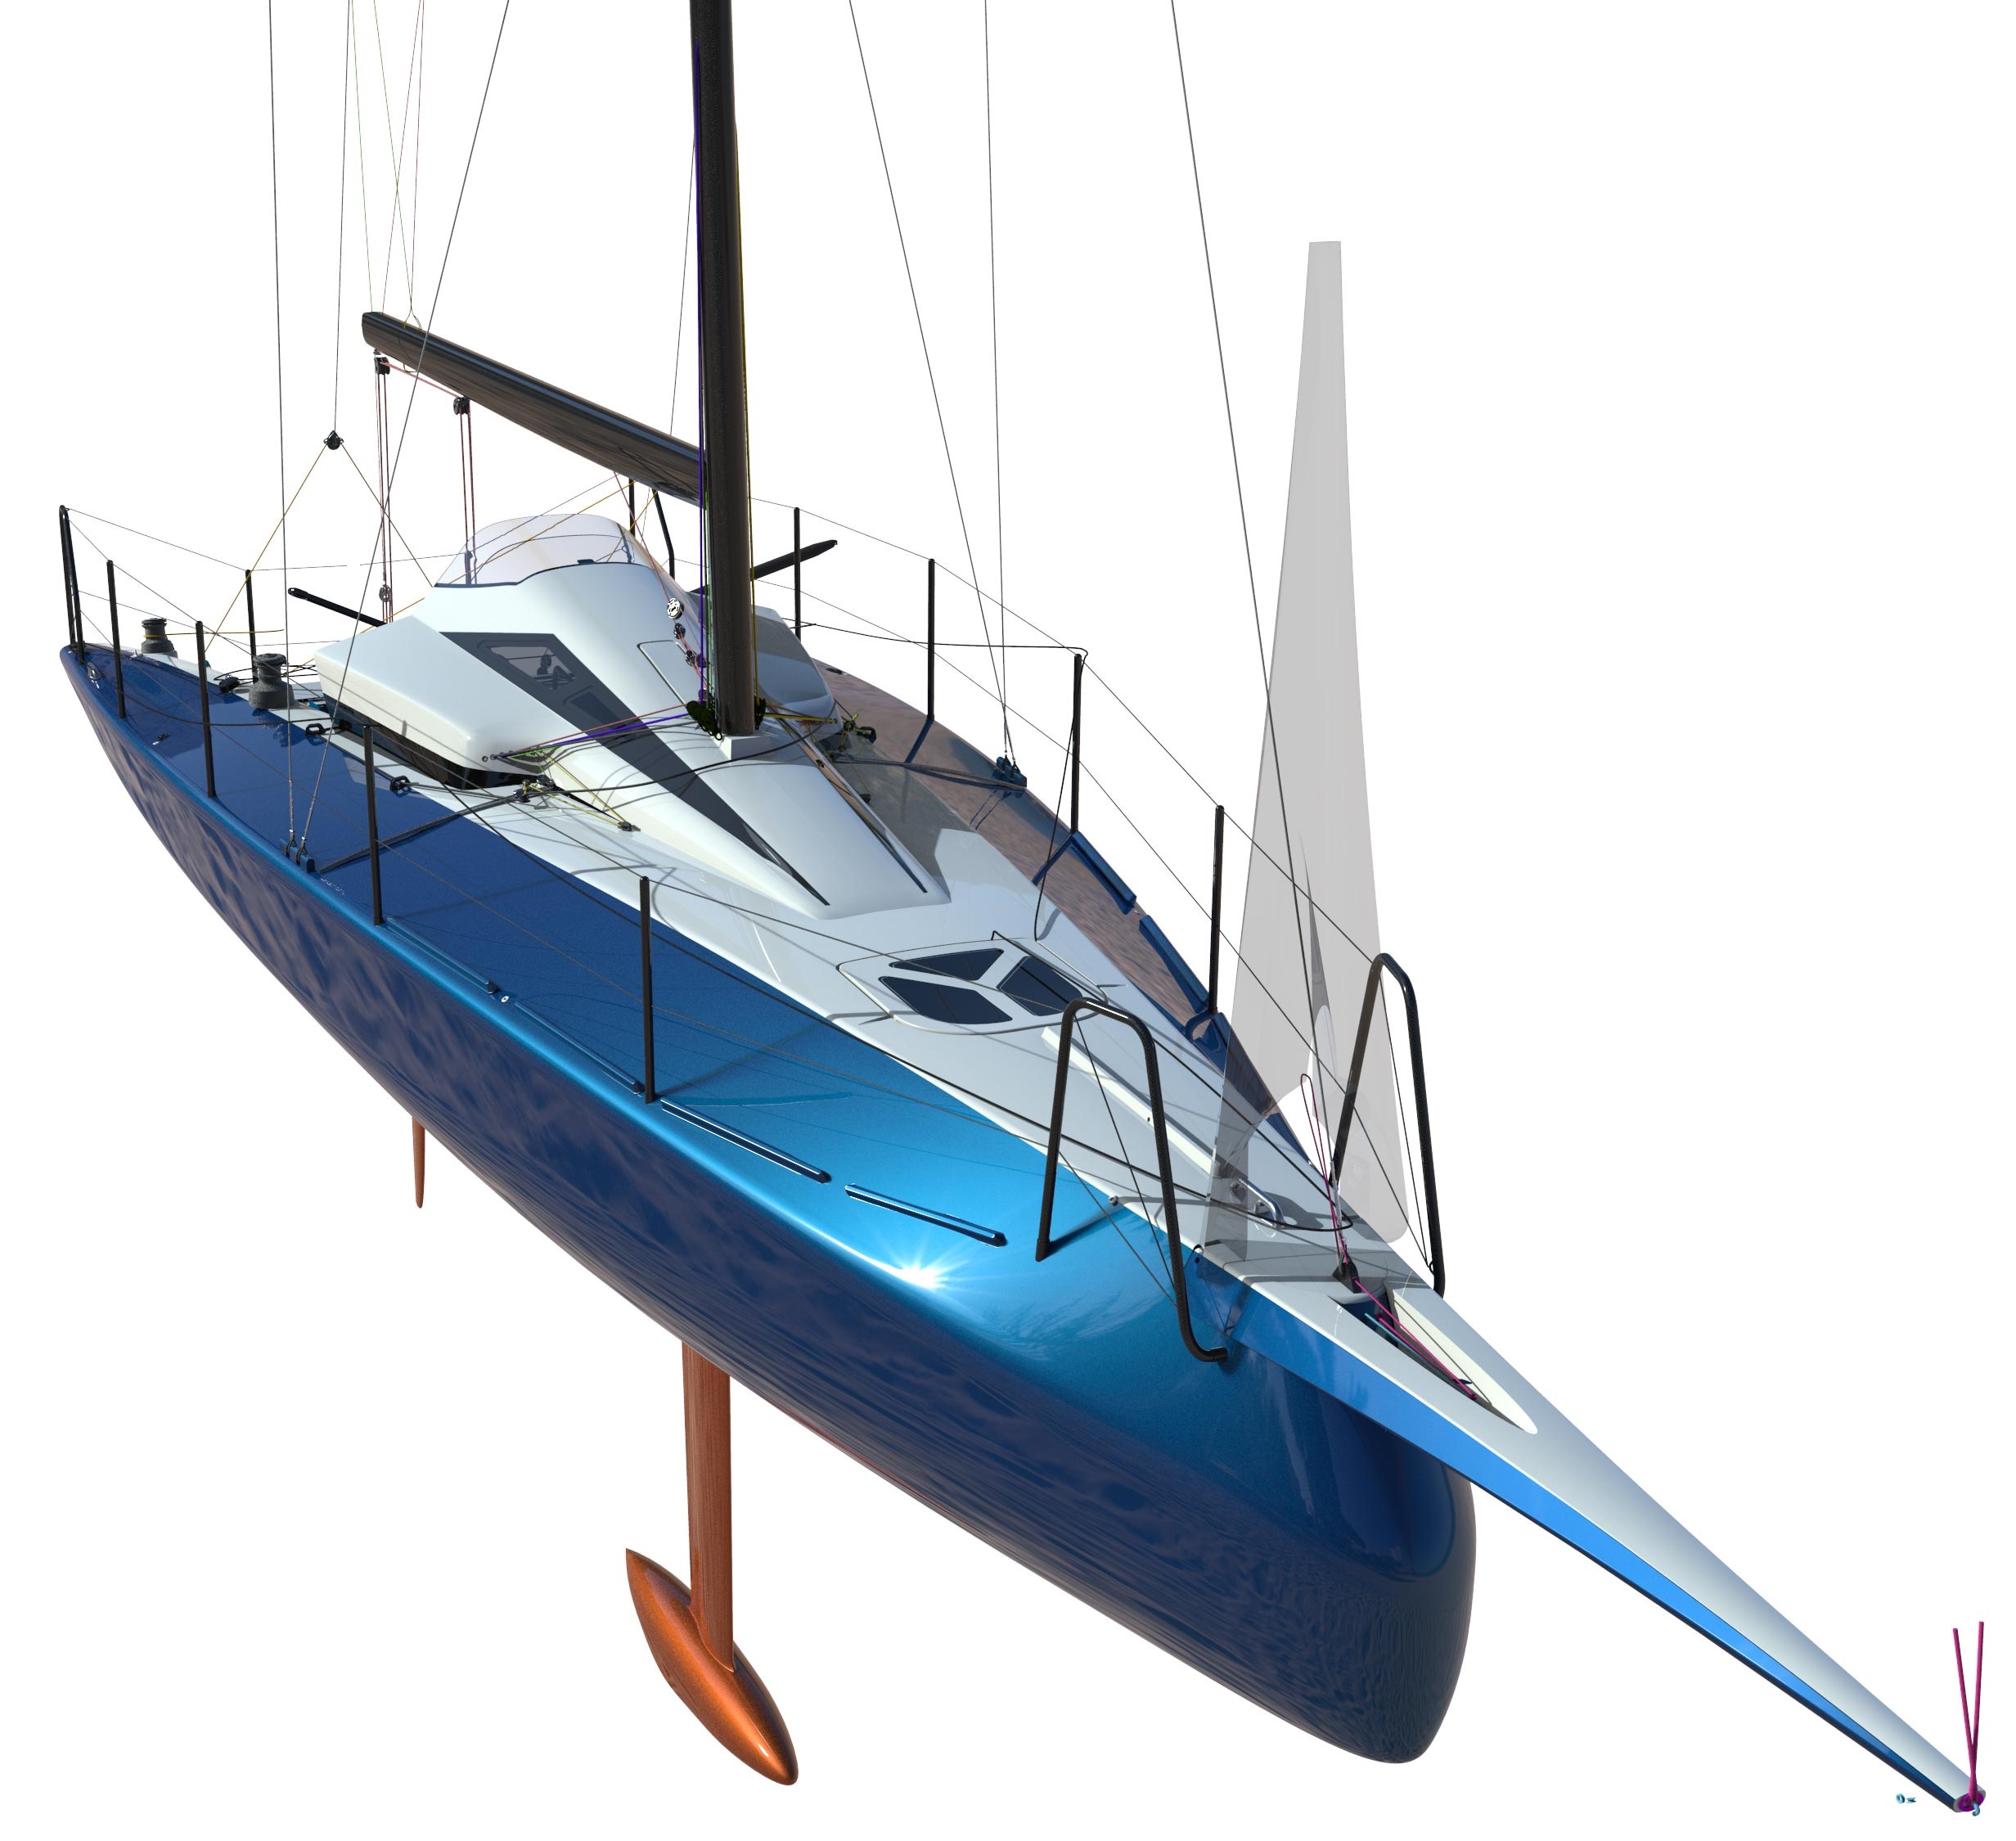 The Aeolos Performance 30 yacht can be used for single and double handed sailing.